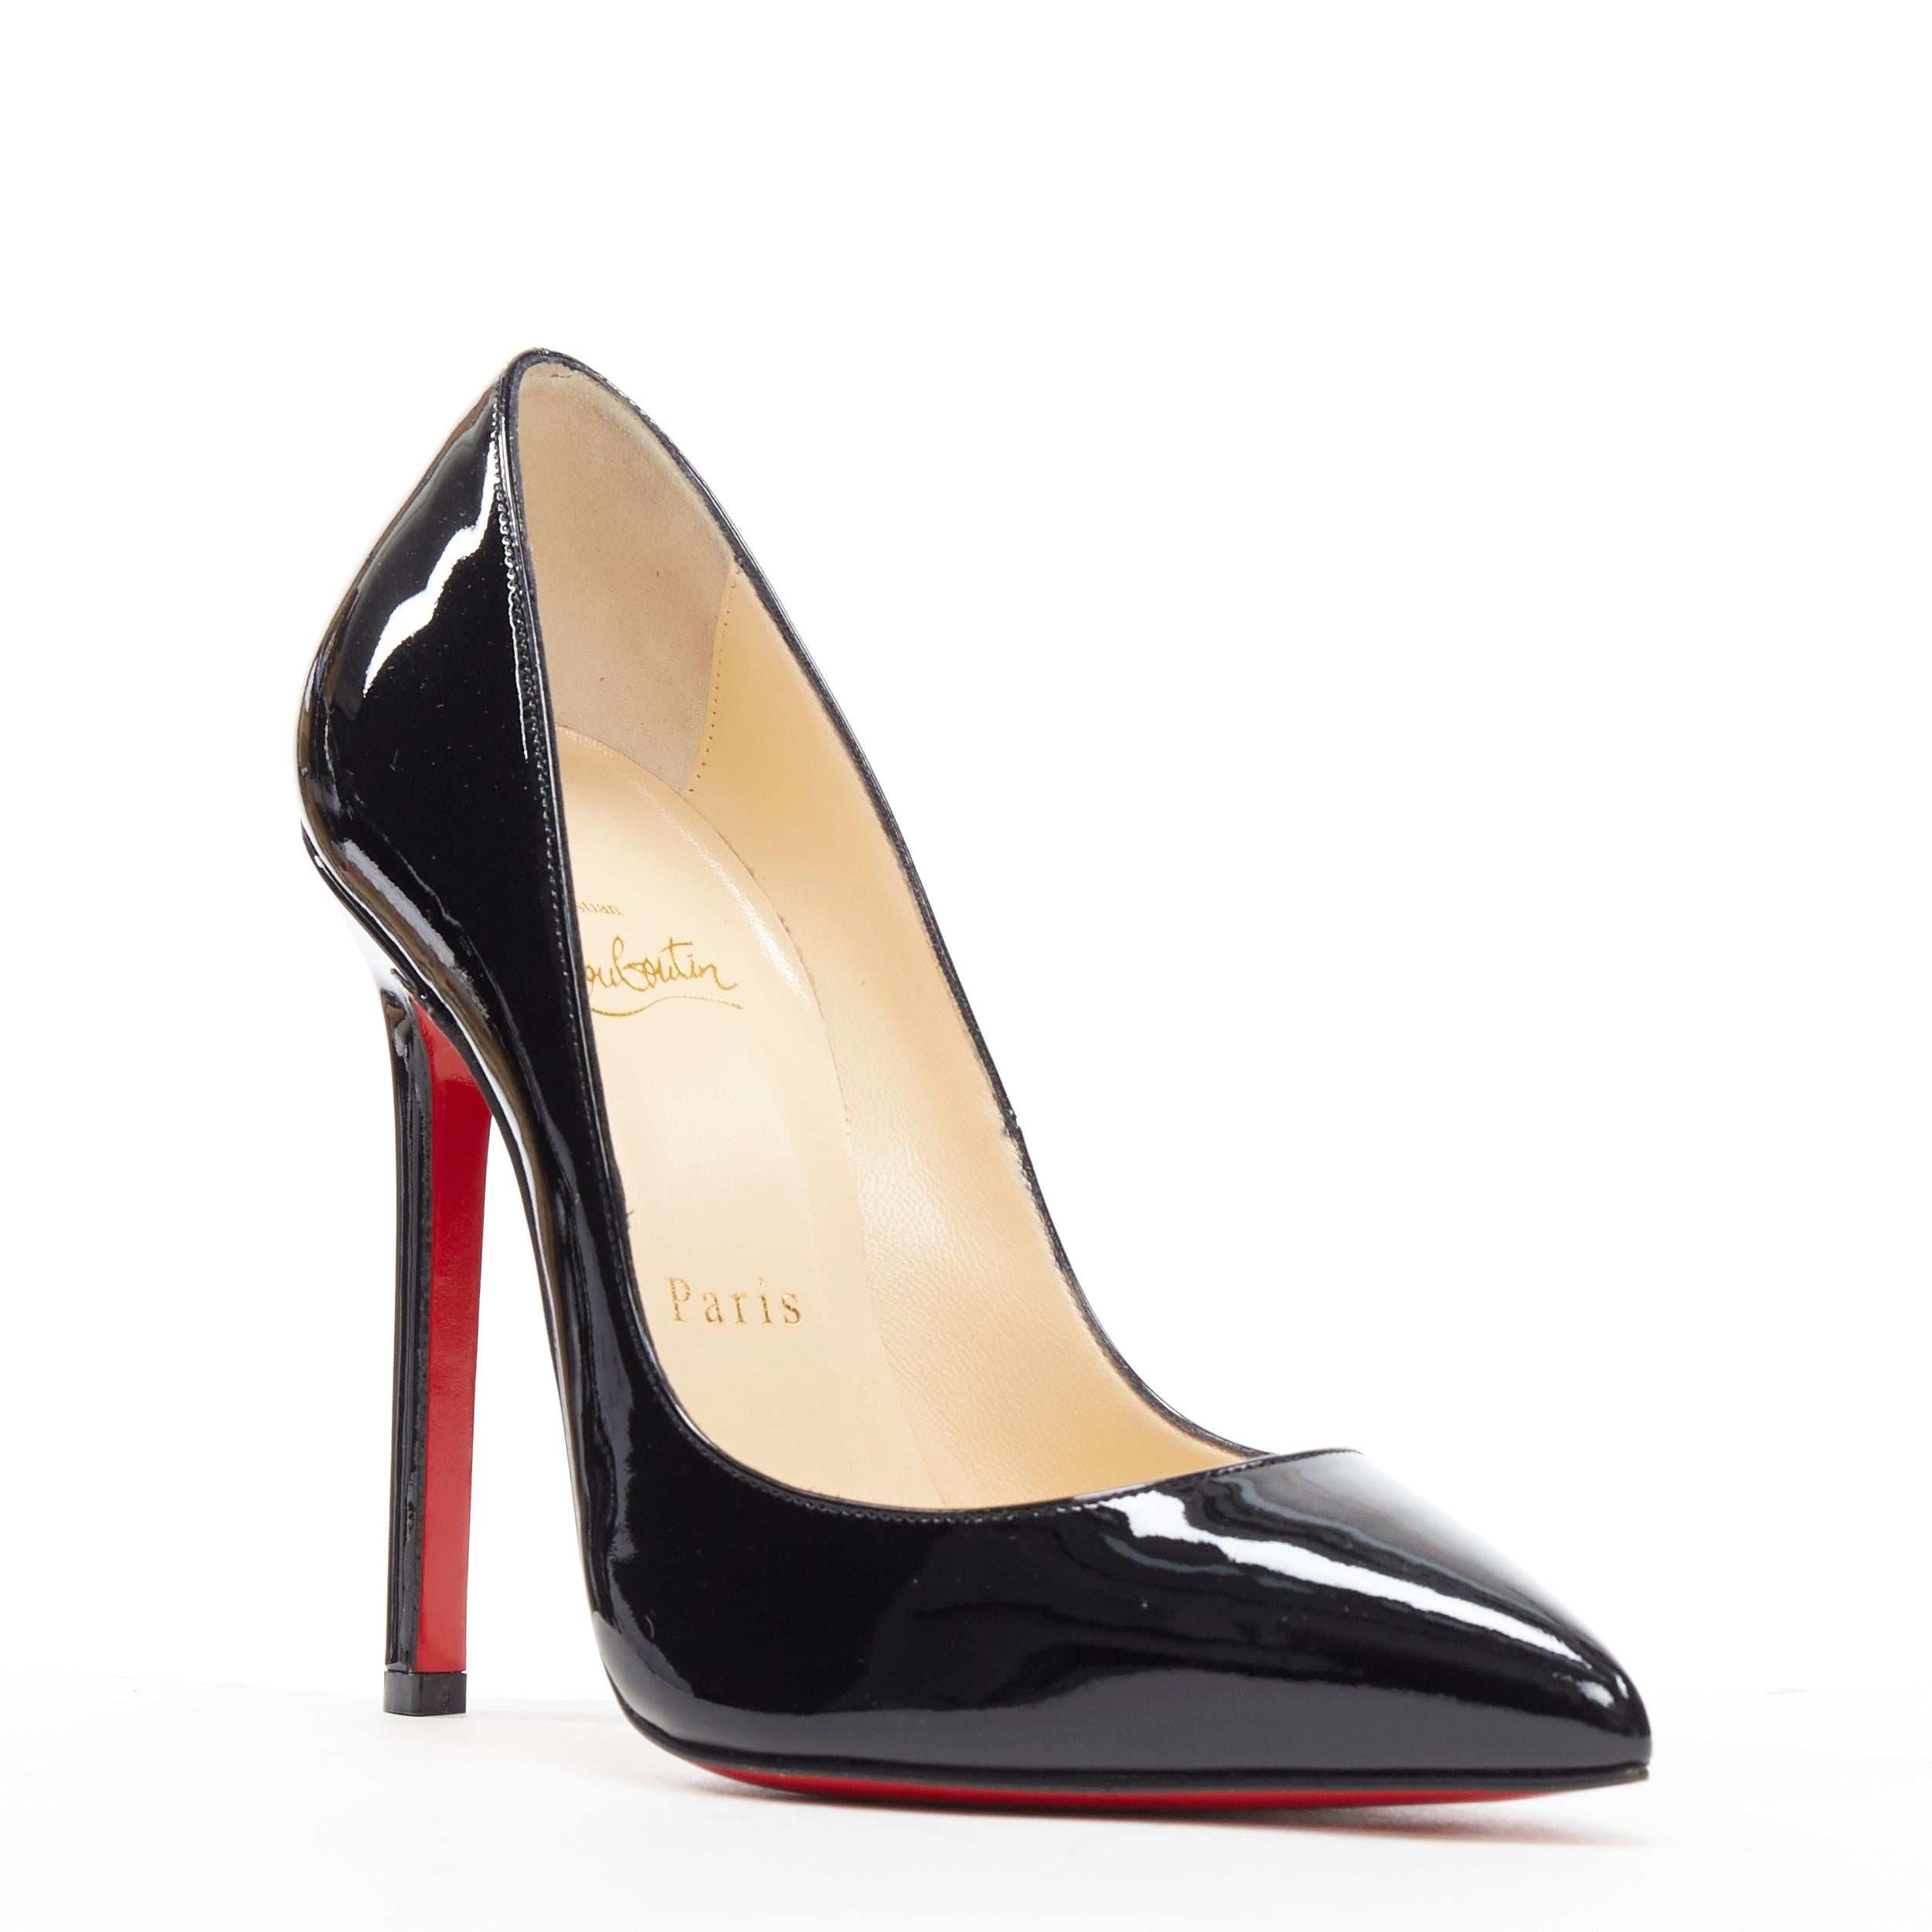 CHRISTIAN LOUBOUTIN black patent pointed toe pigalle high heel pump EU36.5
Brand: Christian Louboutin
Designer: Christian Louboutin
Model Name / Style: Patent pump
Material: Patent leather
Color: Black
Pattern: Solid
Extra Detail: Tonal stitching.